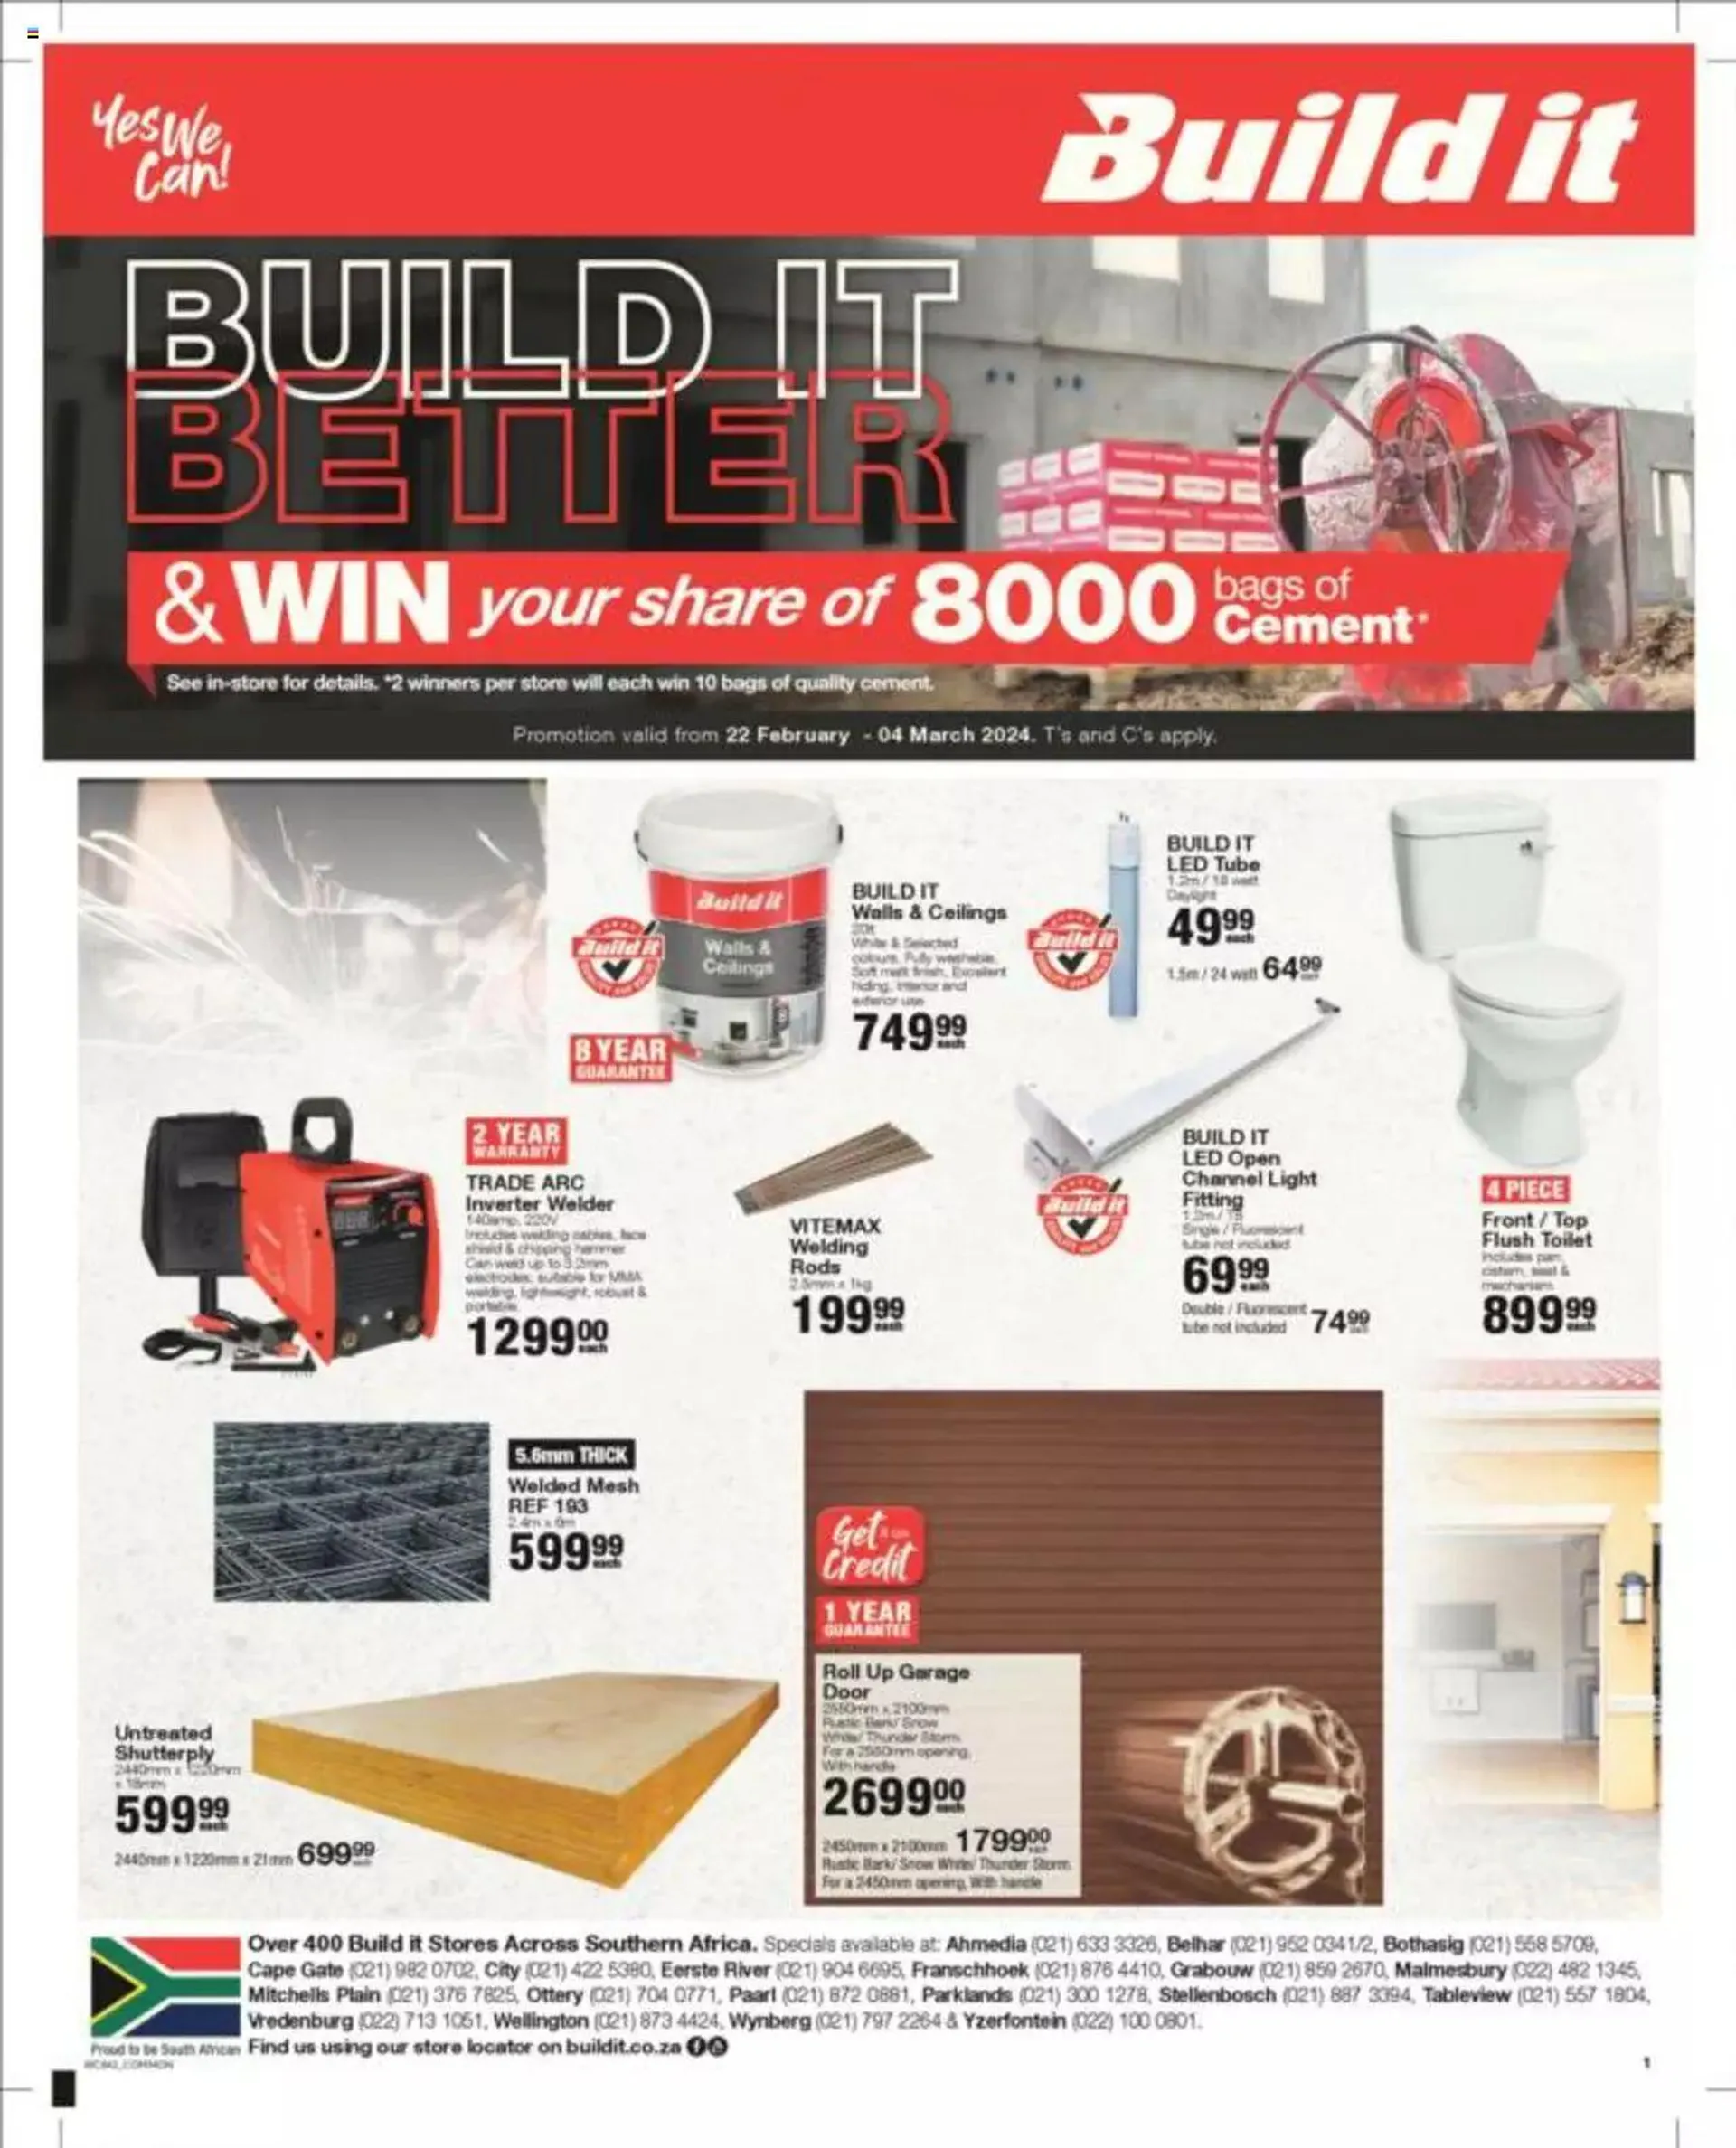 Build It Western Cape - Specials - 22 February 4 March 2024 - Page 2